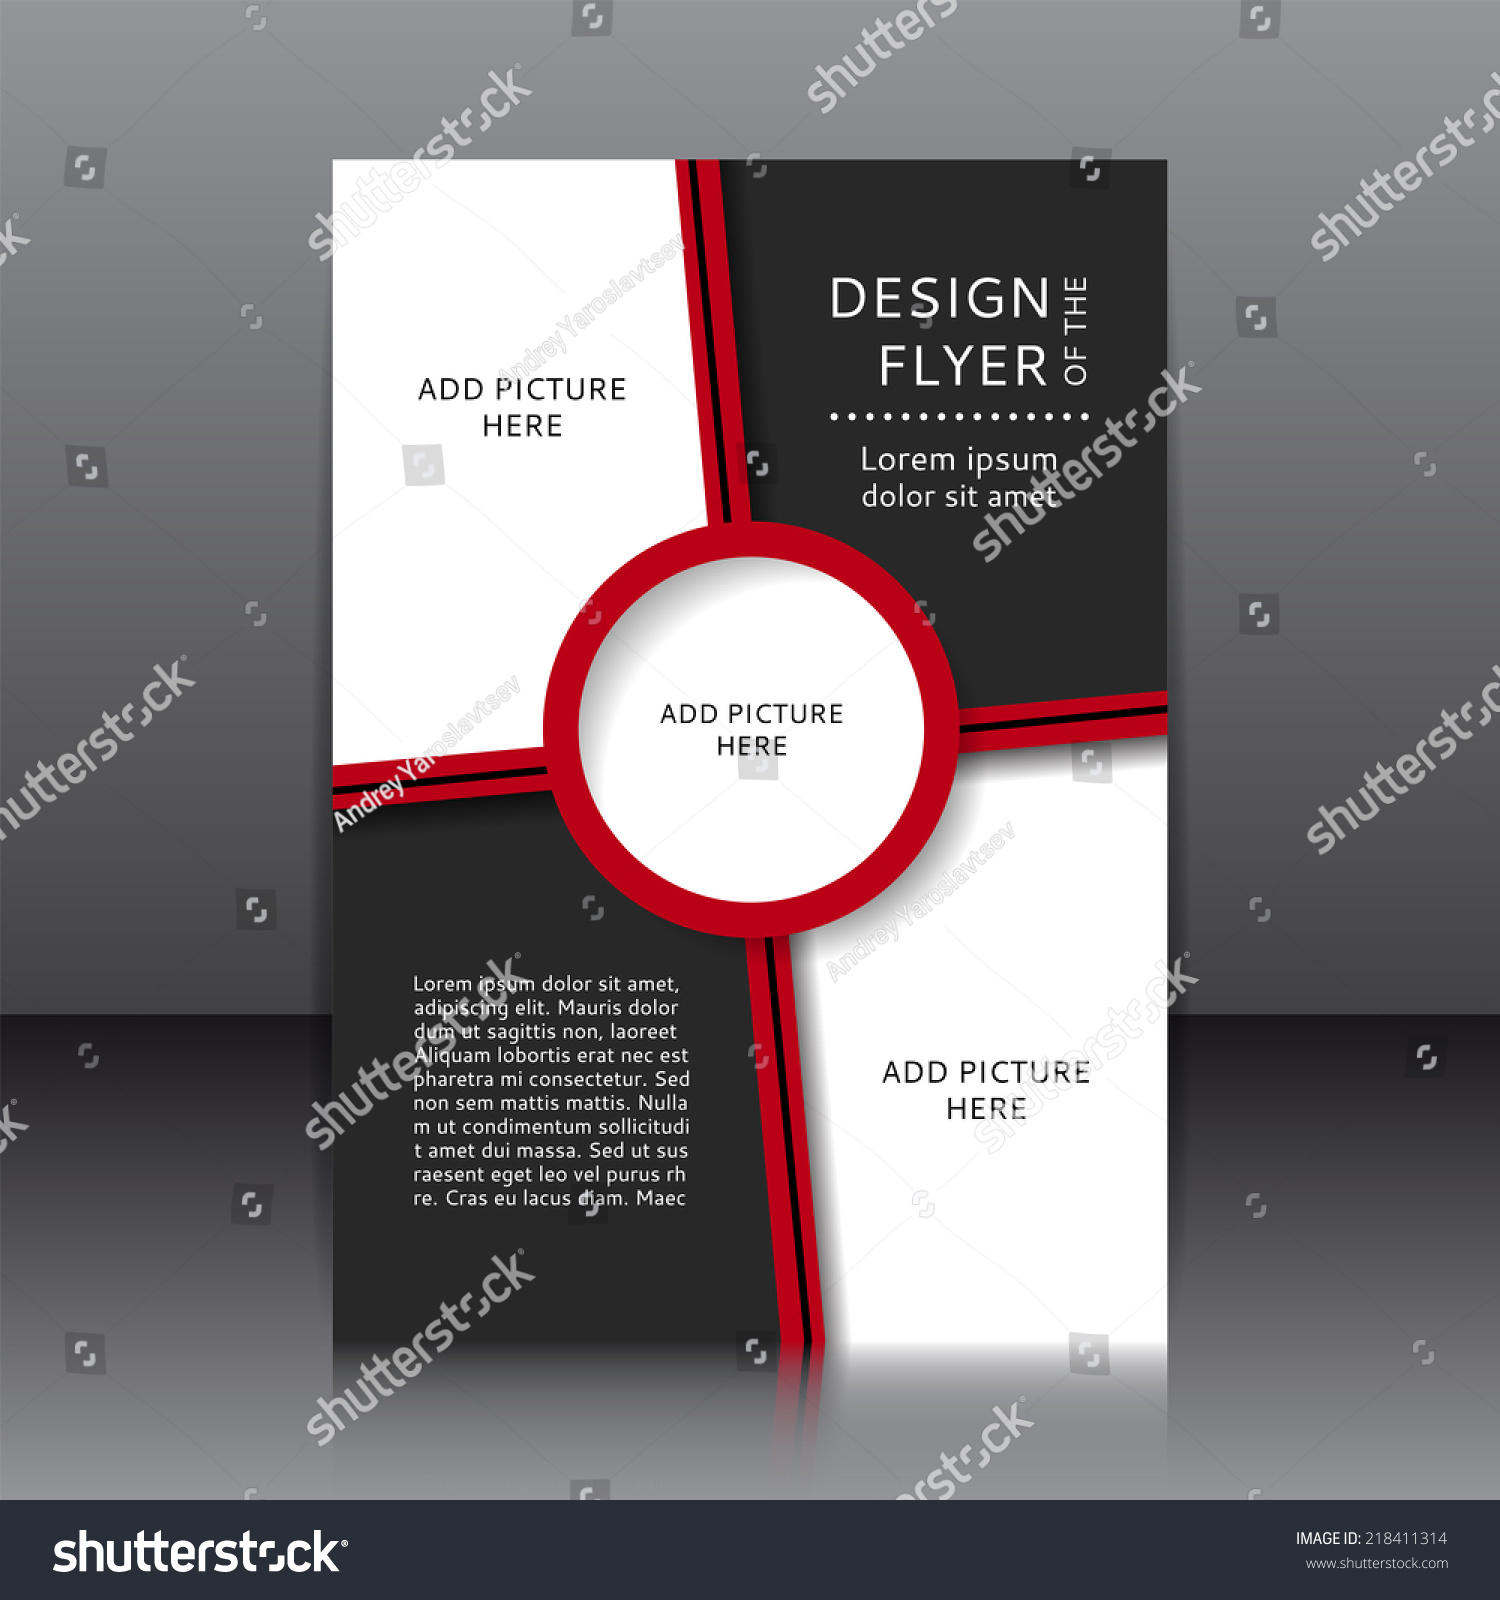 Vector Design Of The Flyer. Poster Template For Your Business